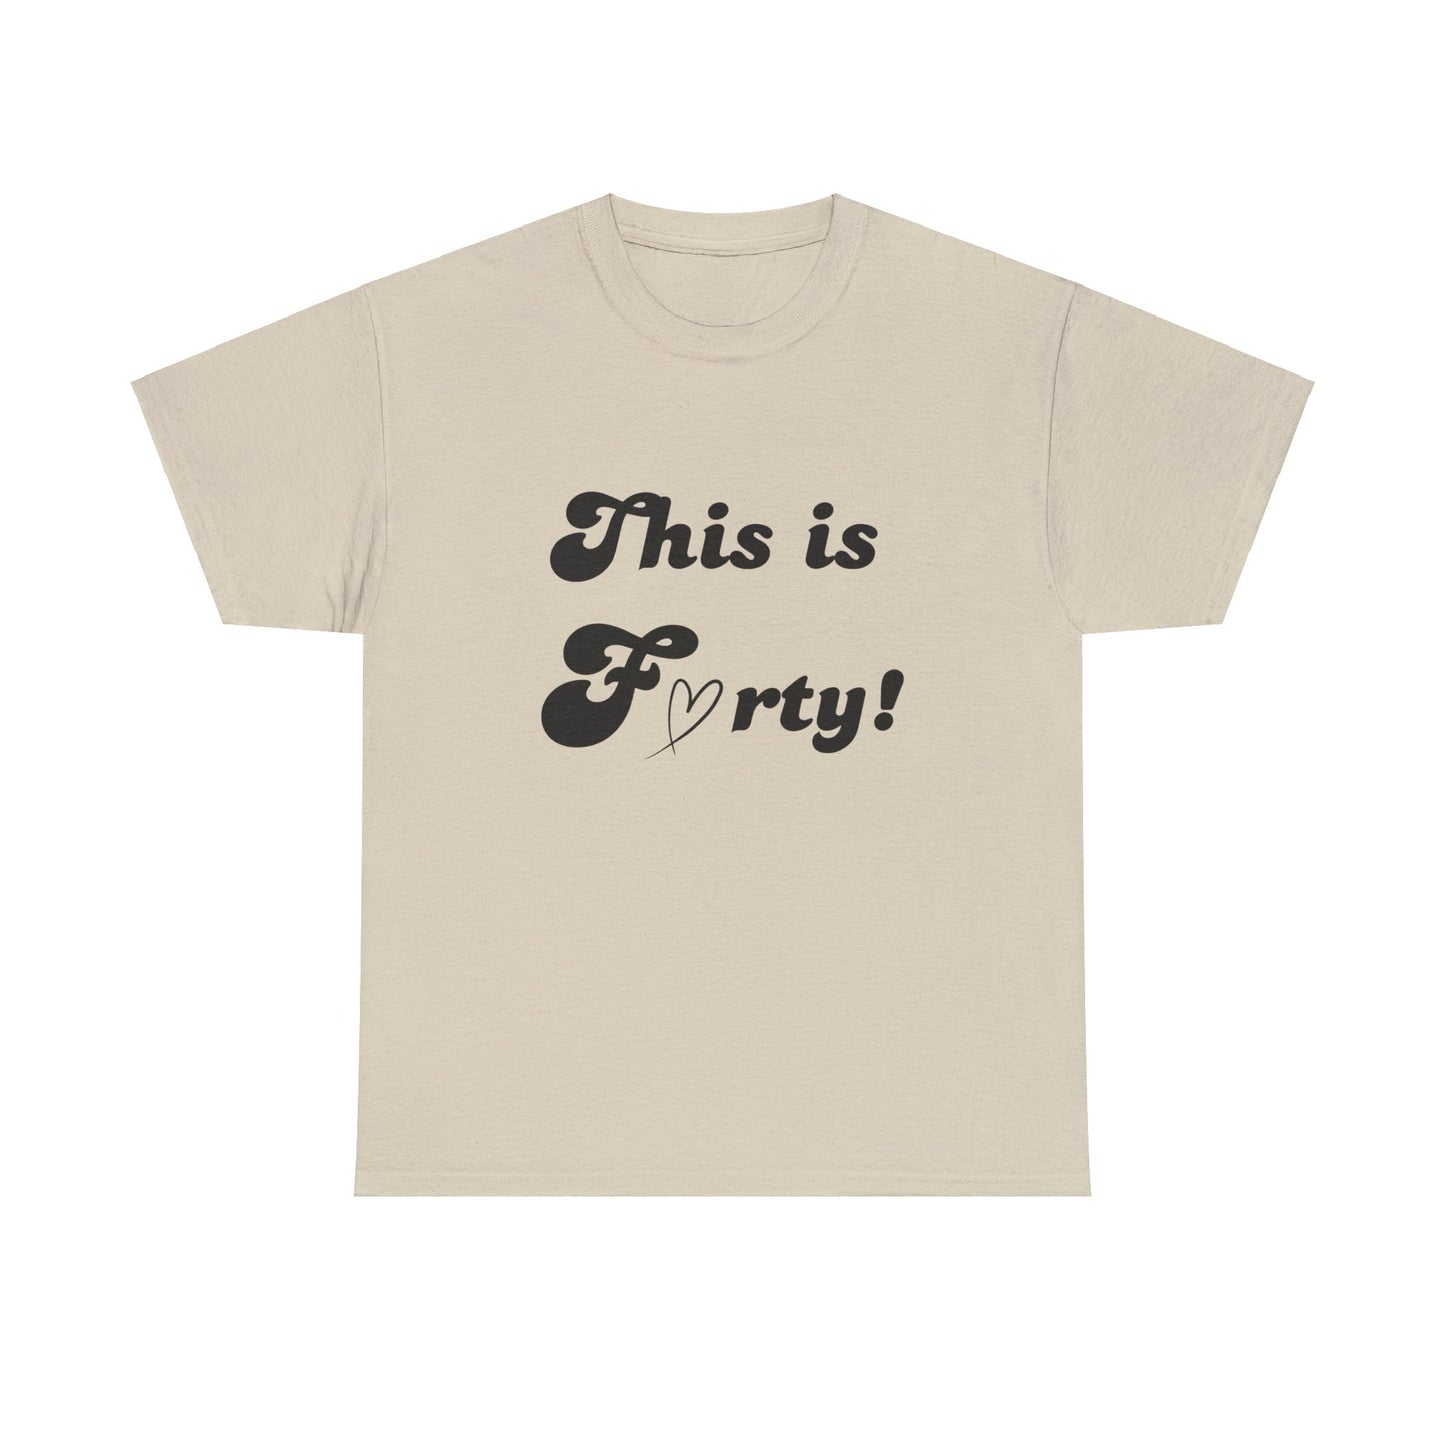 This is Forty Tshirt - 40th Birthday Tee